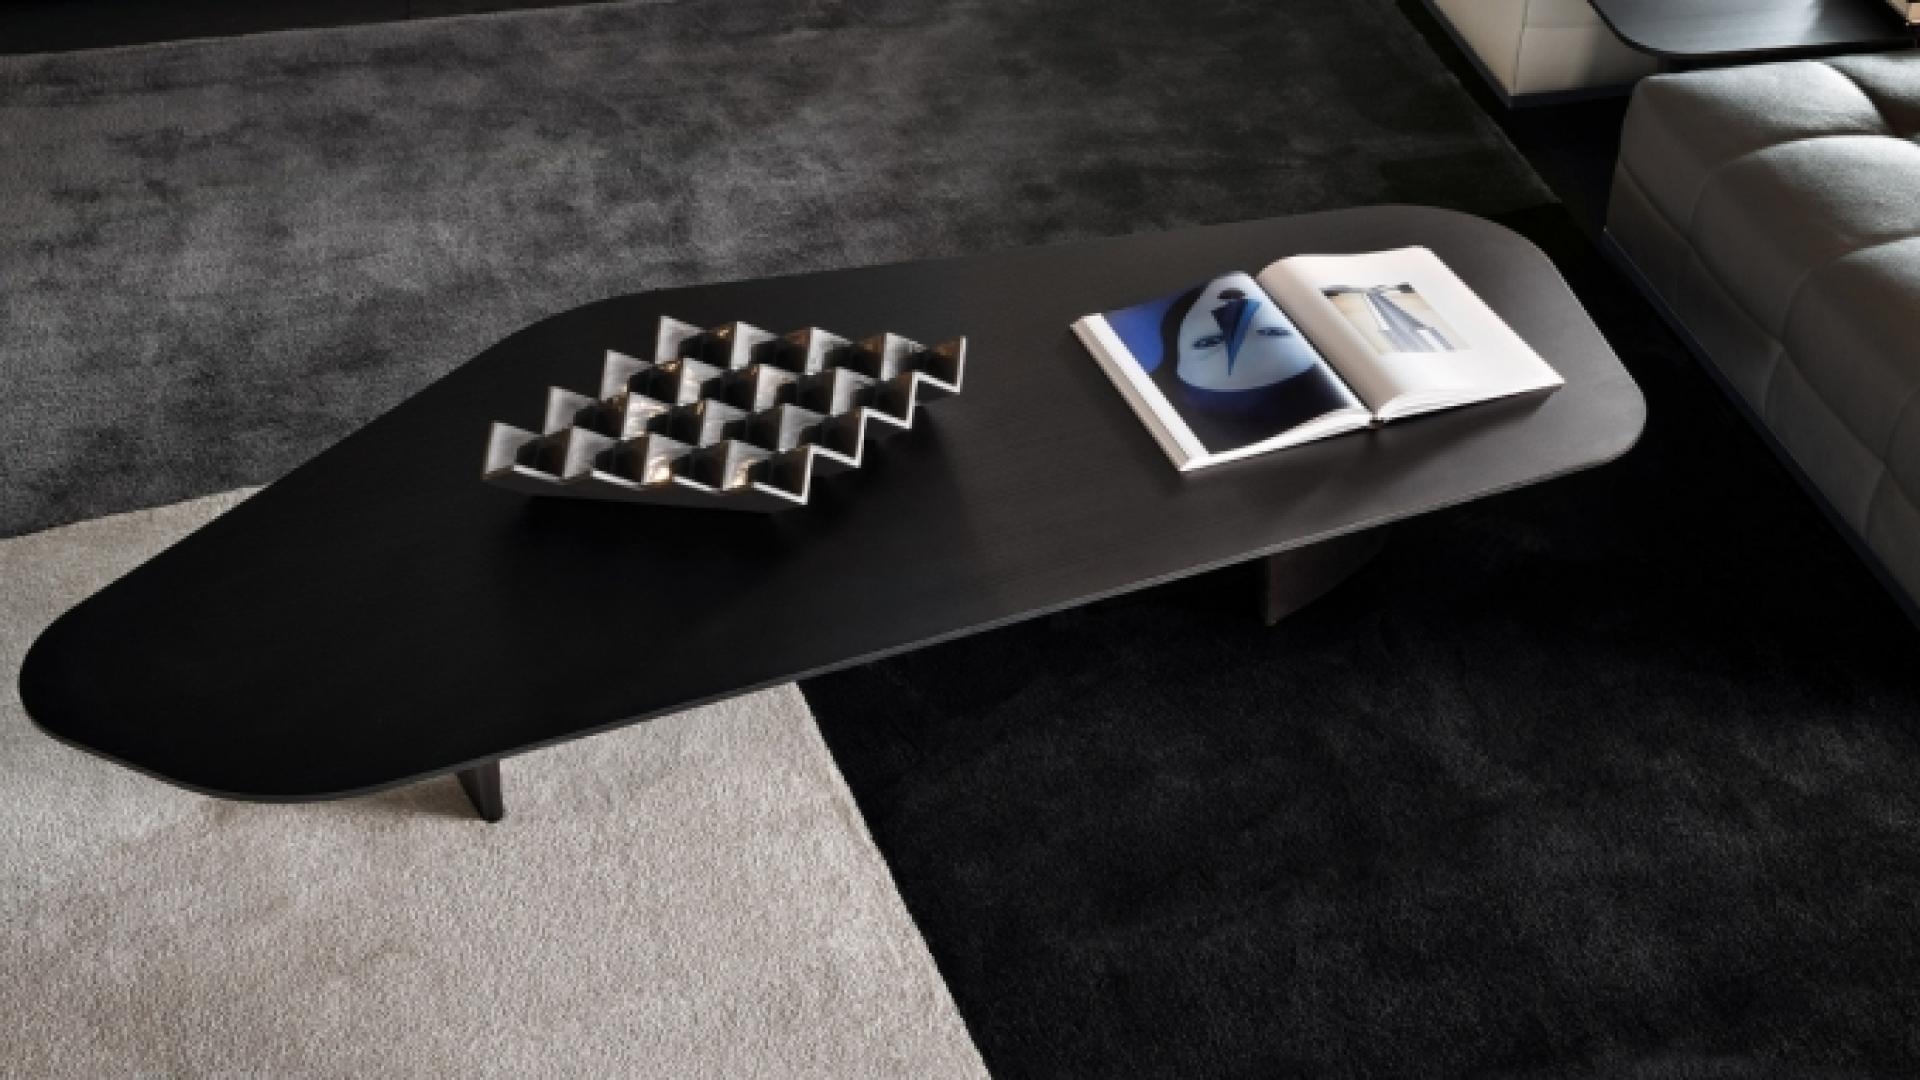 Song Coffee Table